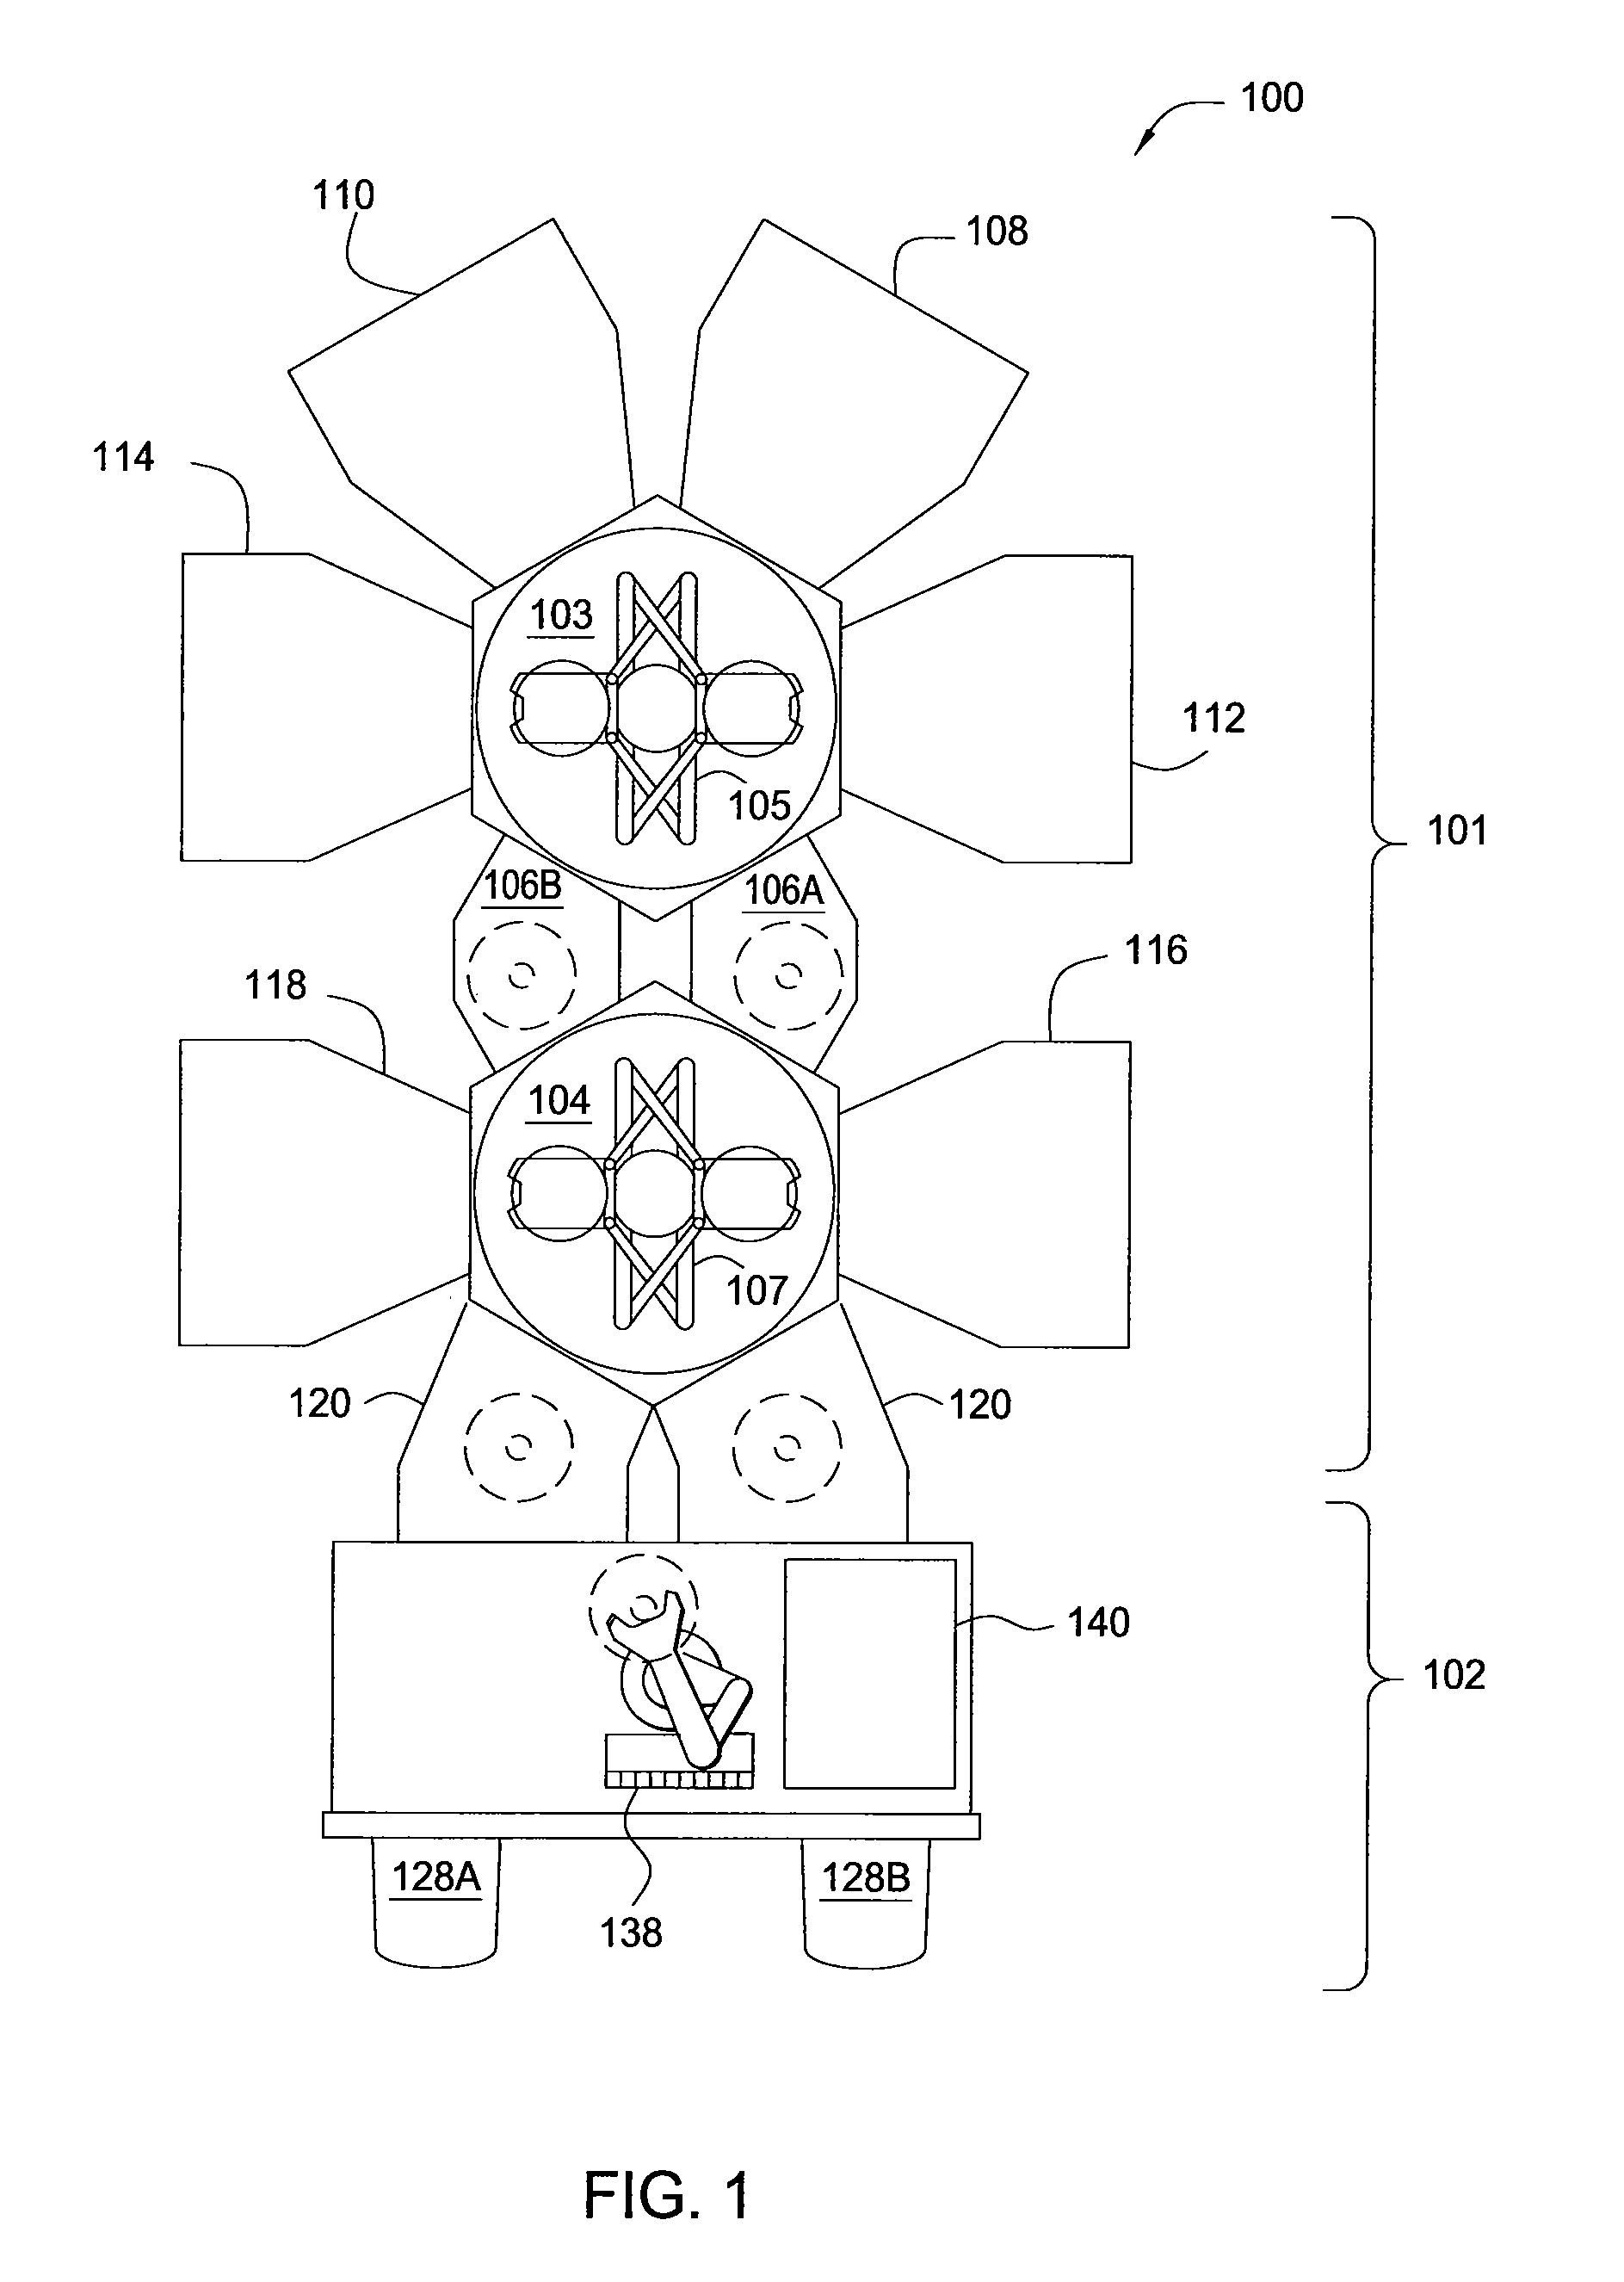 Software sequencer for integrated substrate processing system